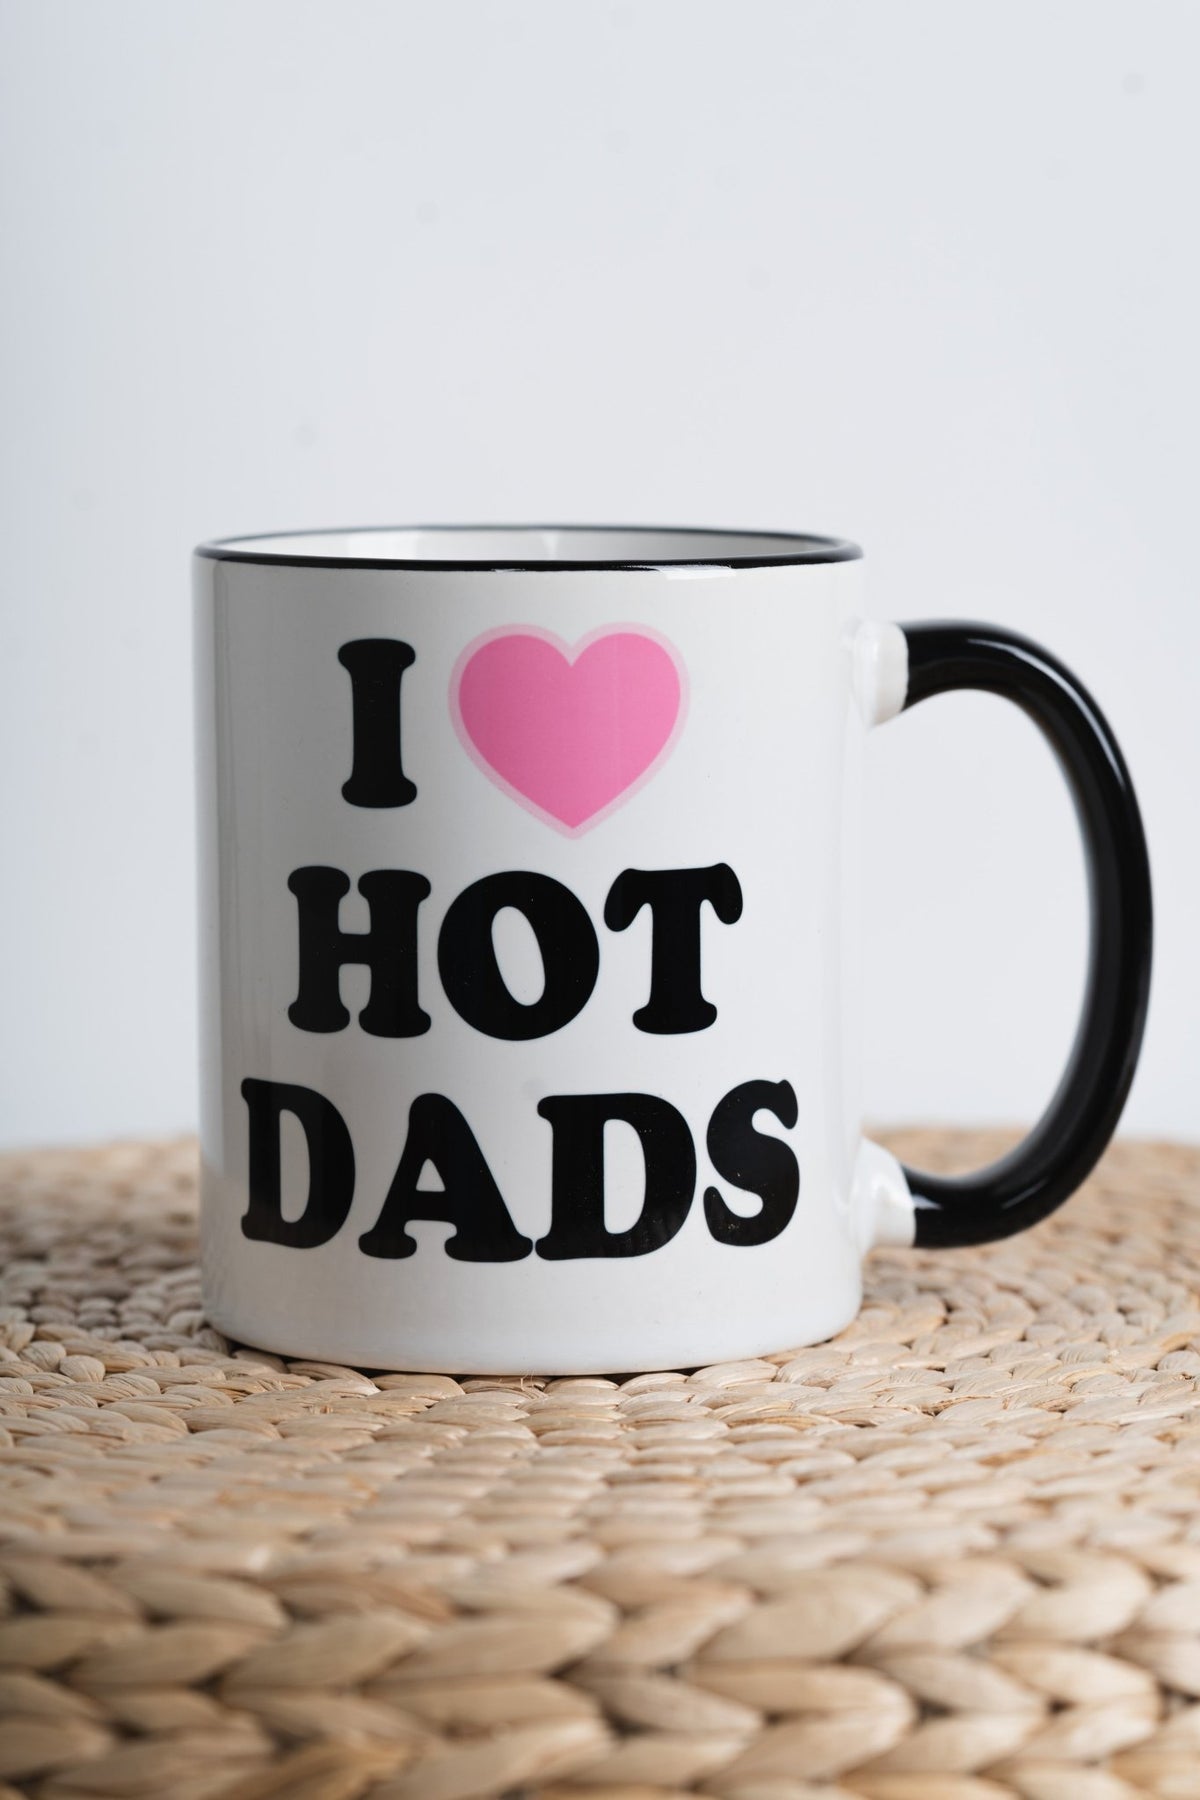 Mugsby I love hot dads coffee mug - Trendy Tumblers, Mugs and Cups at Lush Fashion Lounge Boutique in Oklahoma City